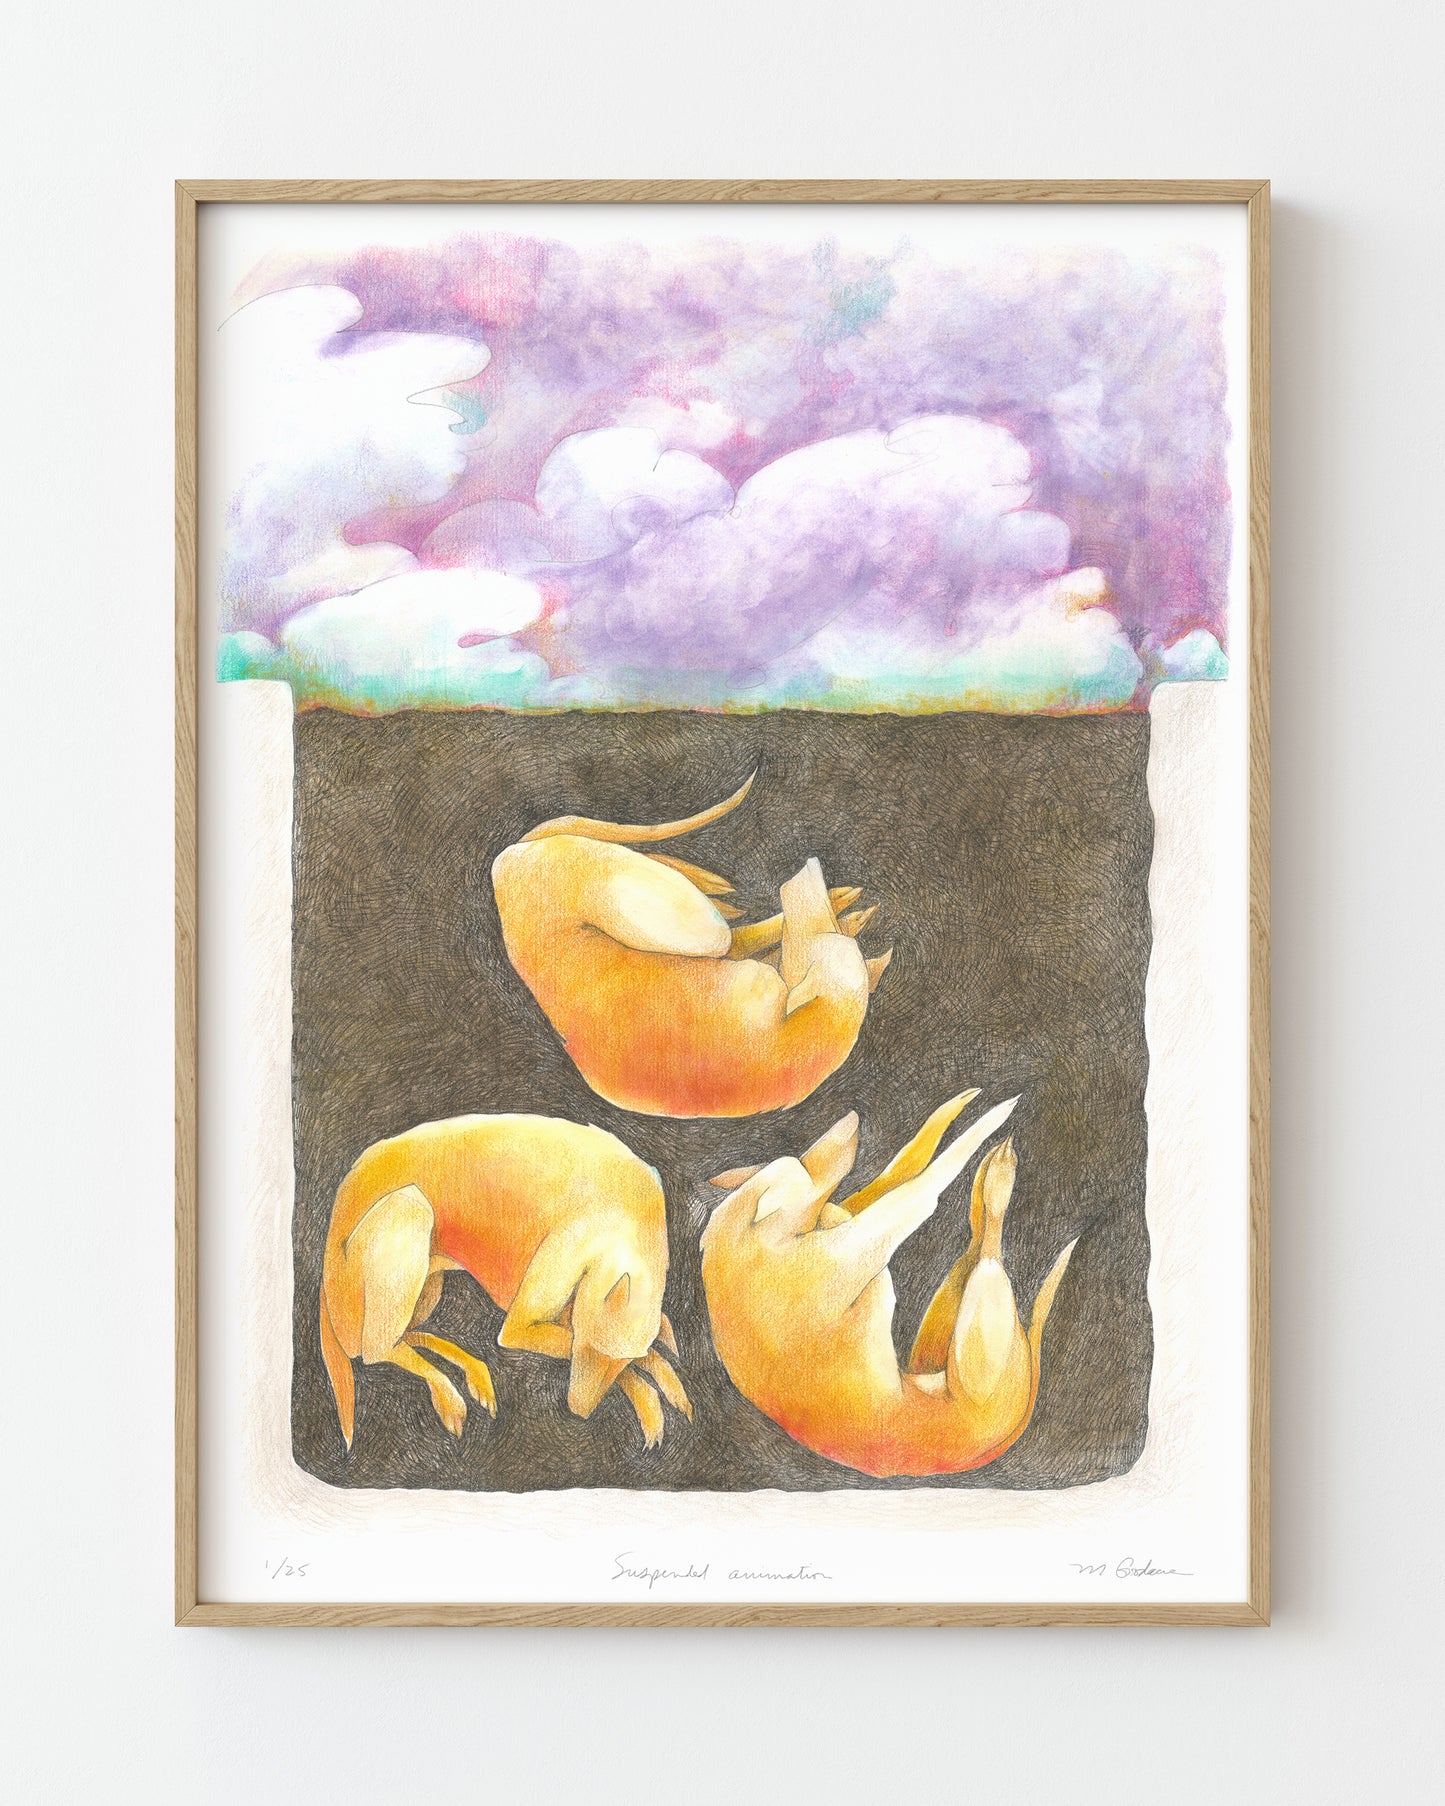 Framed surreal colored pencil drawings of three orange dogs sleeping underground below a cloudy sky.